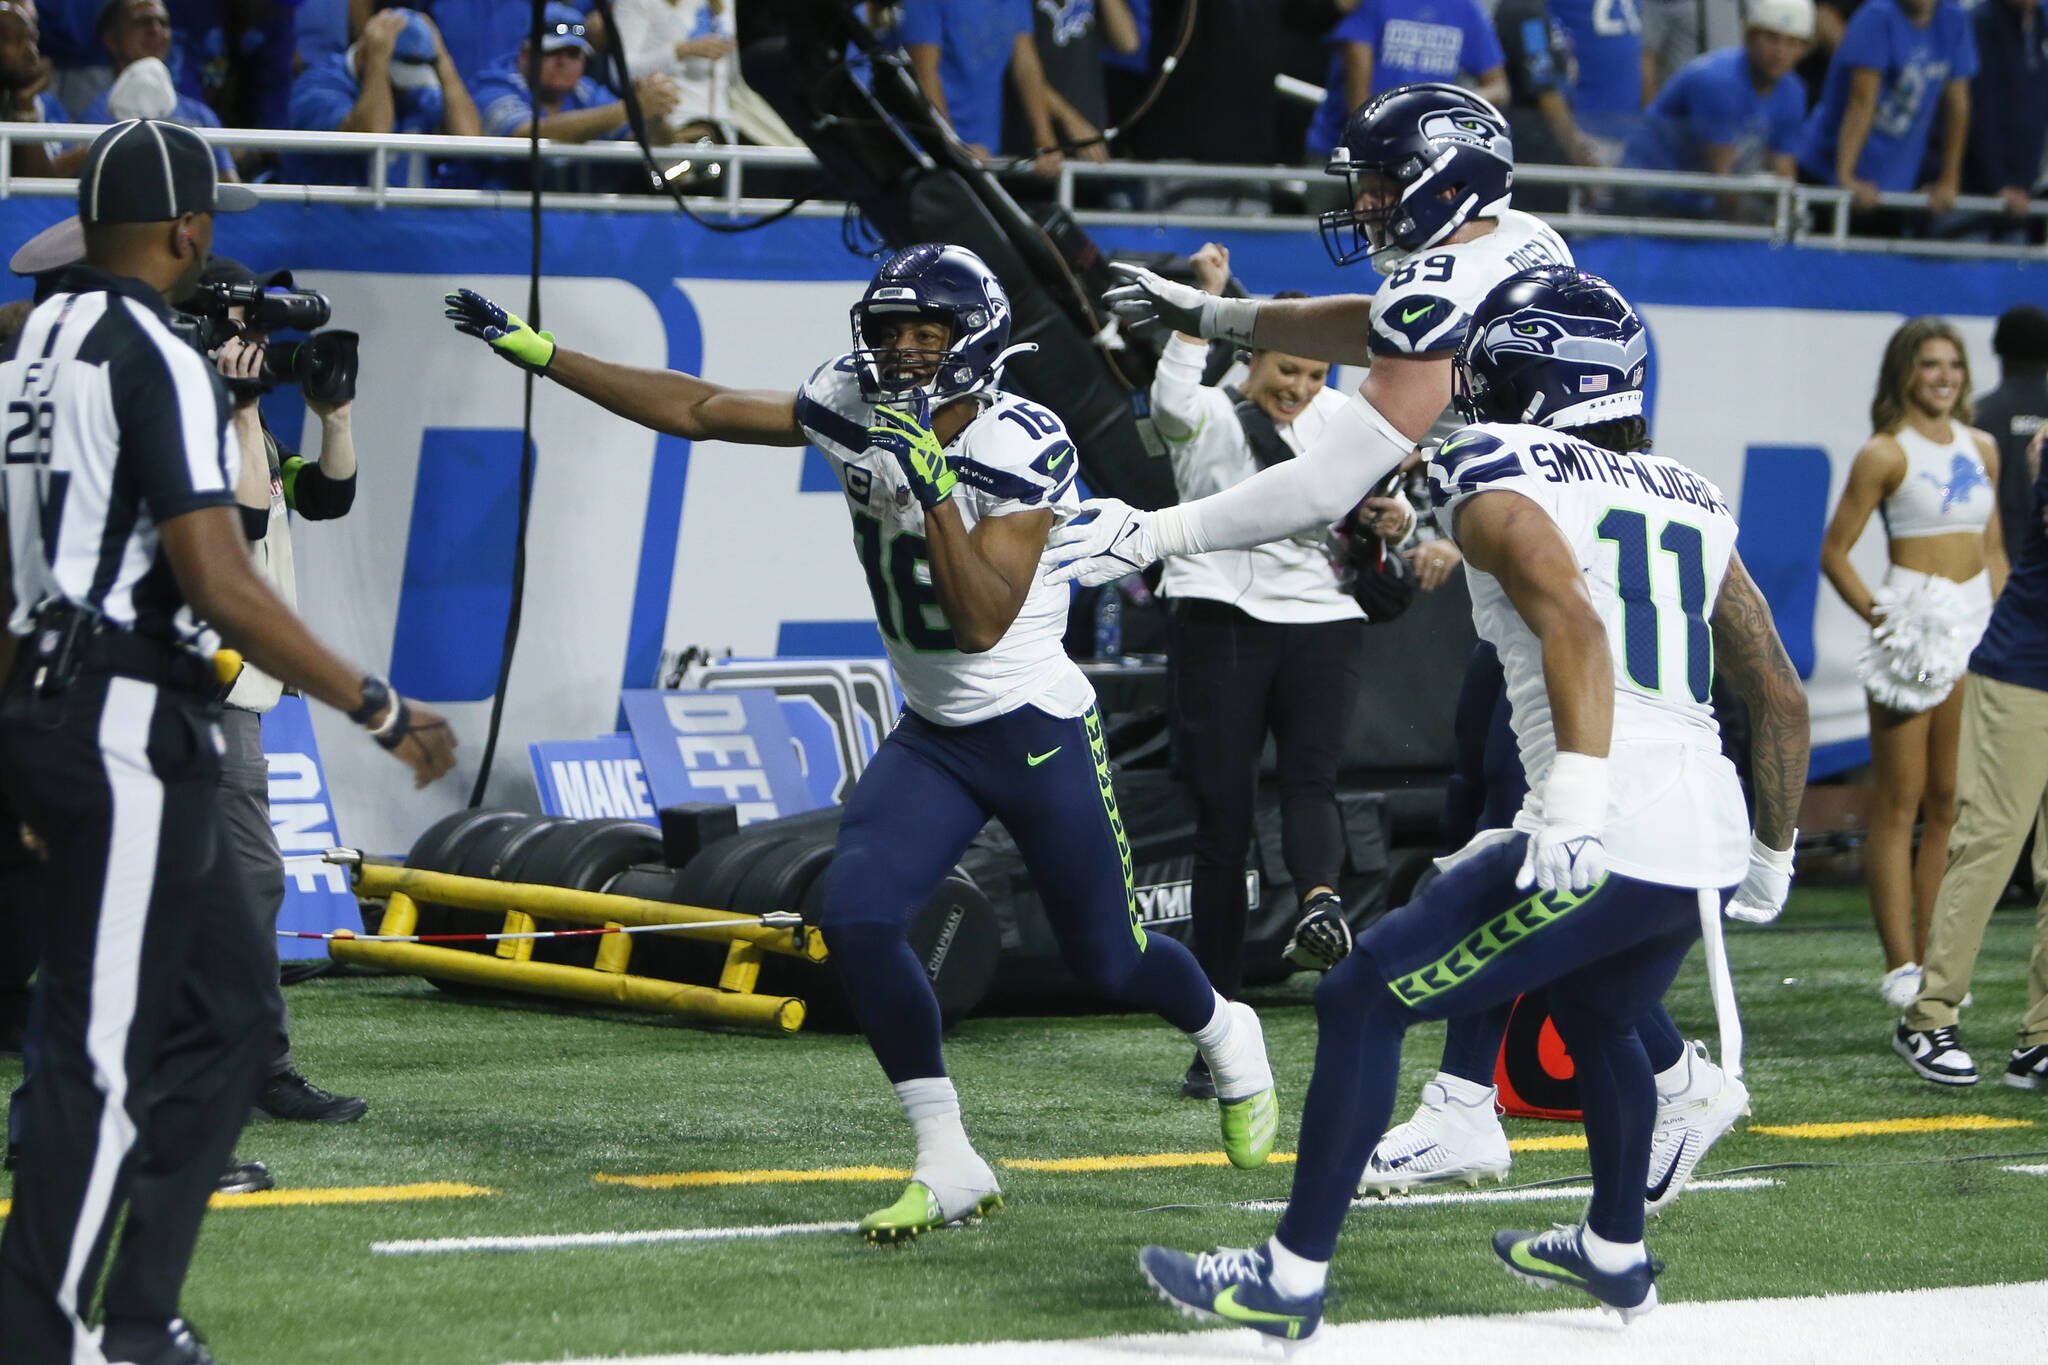 Seattle Seahawks wide receiver Tyler Lockett (16) celebrates with teammates after catching the game-winning 6-yard touchdown pass during overtime Sunday against the Detroit Lions. (AP Photo/Duane Burleson)